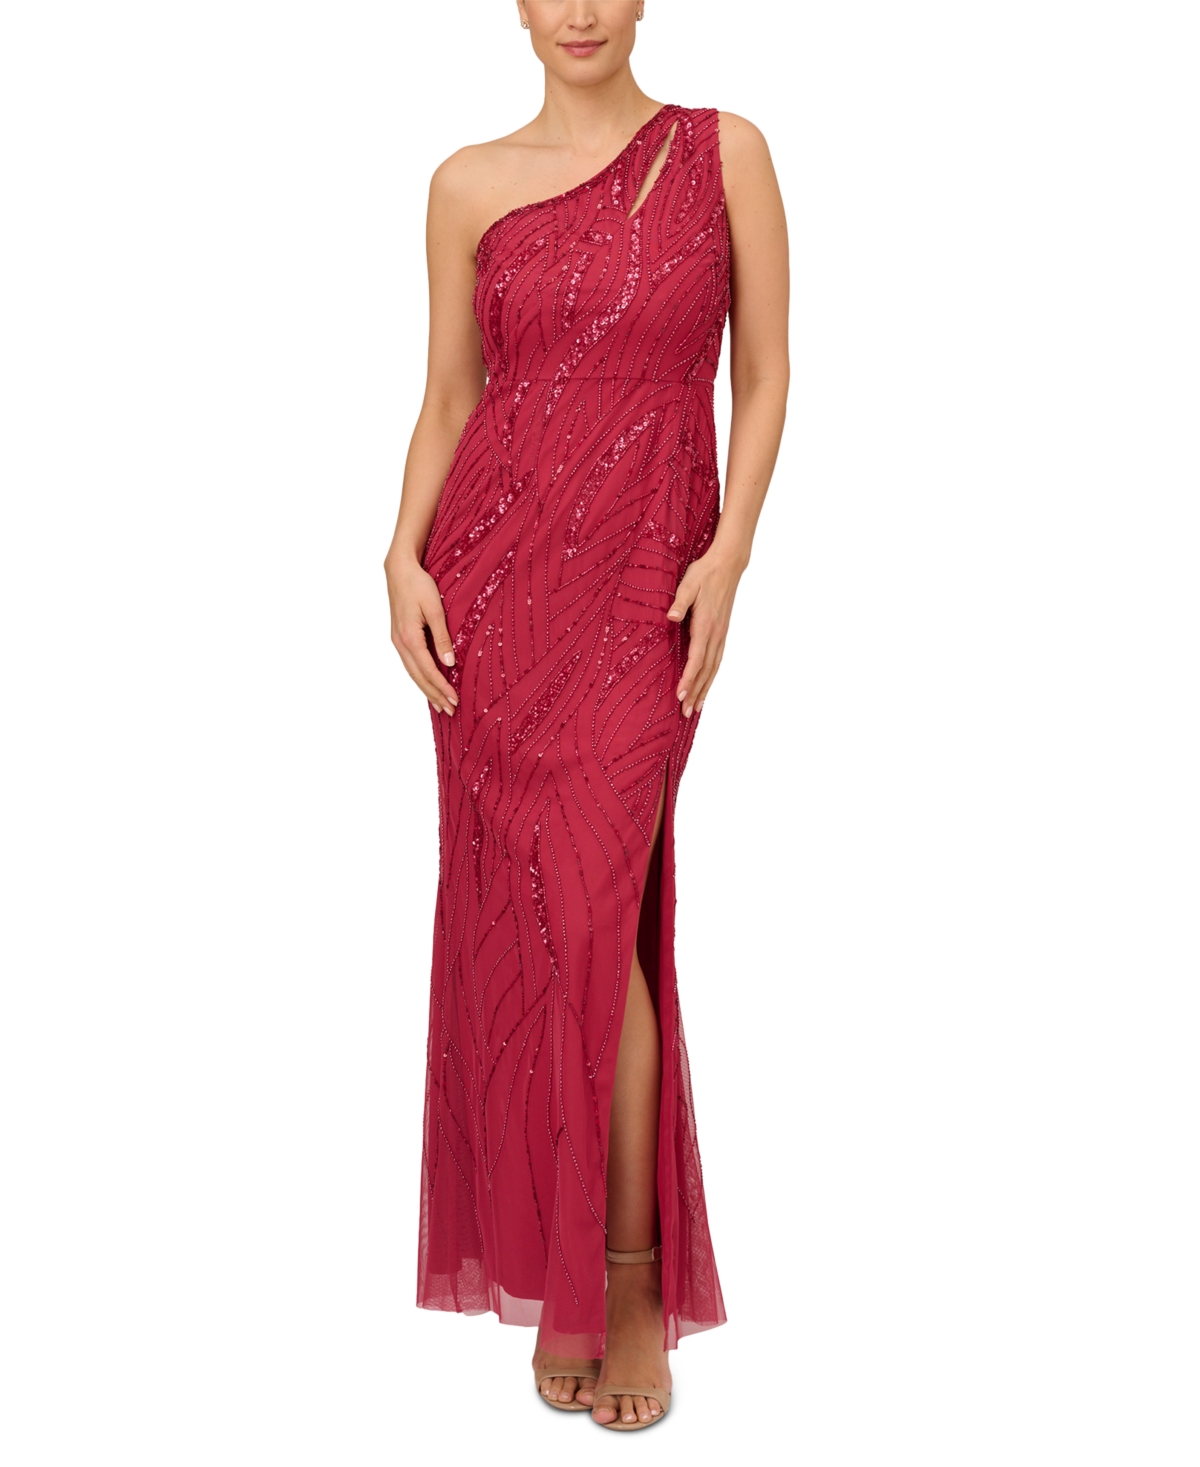 Adrianna Papell Women's Beaded One-Shoulder Gown